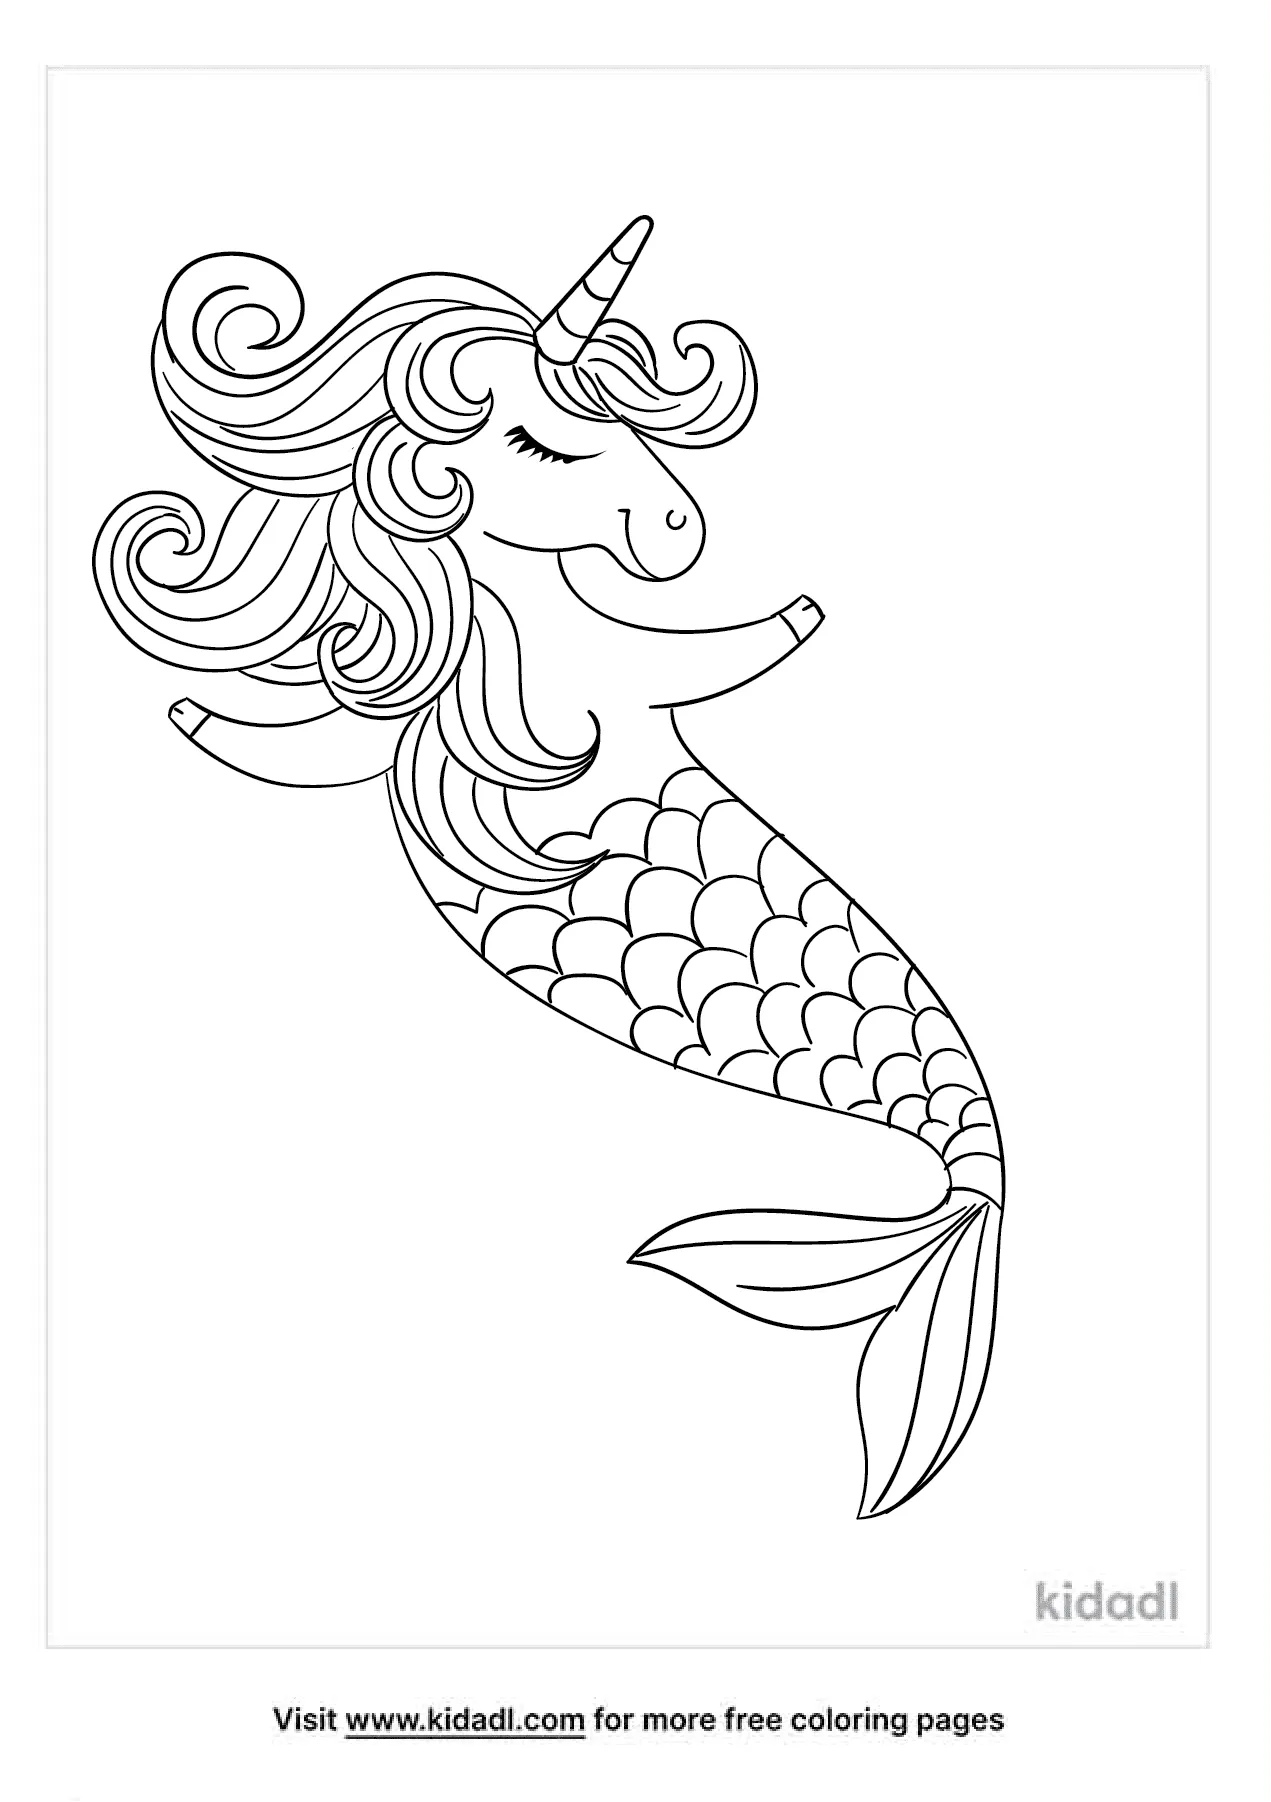 Unicorn Mermaid Coloring Pages   Free Unicorns Coloring Pages   Kidadl